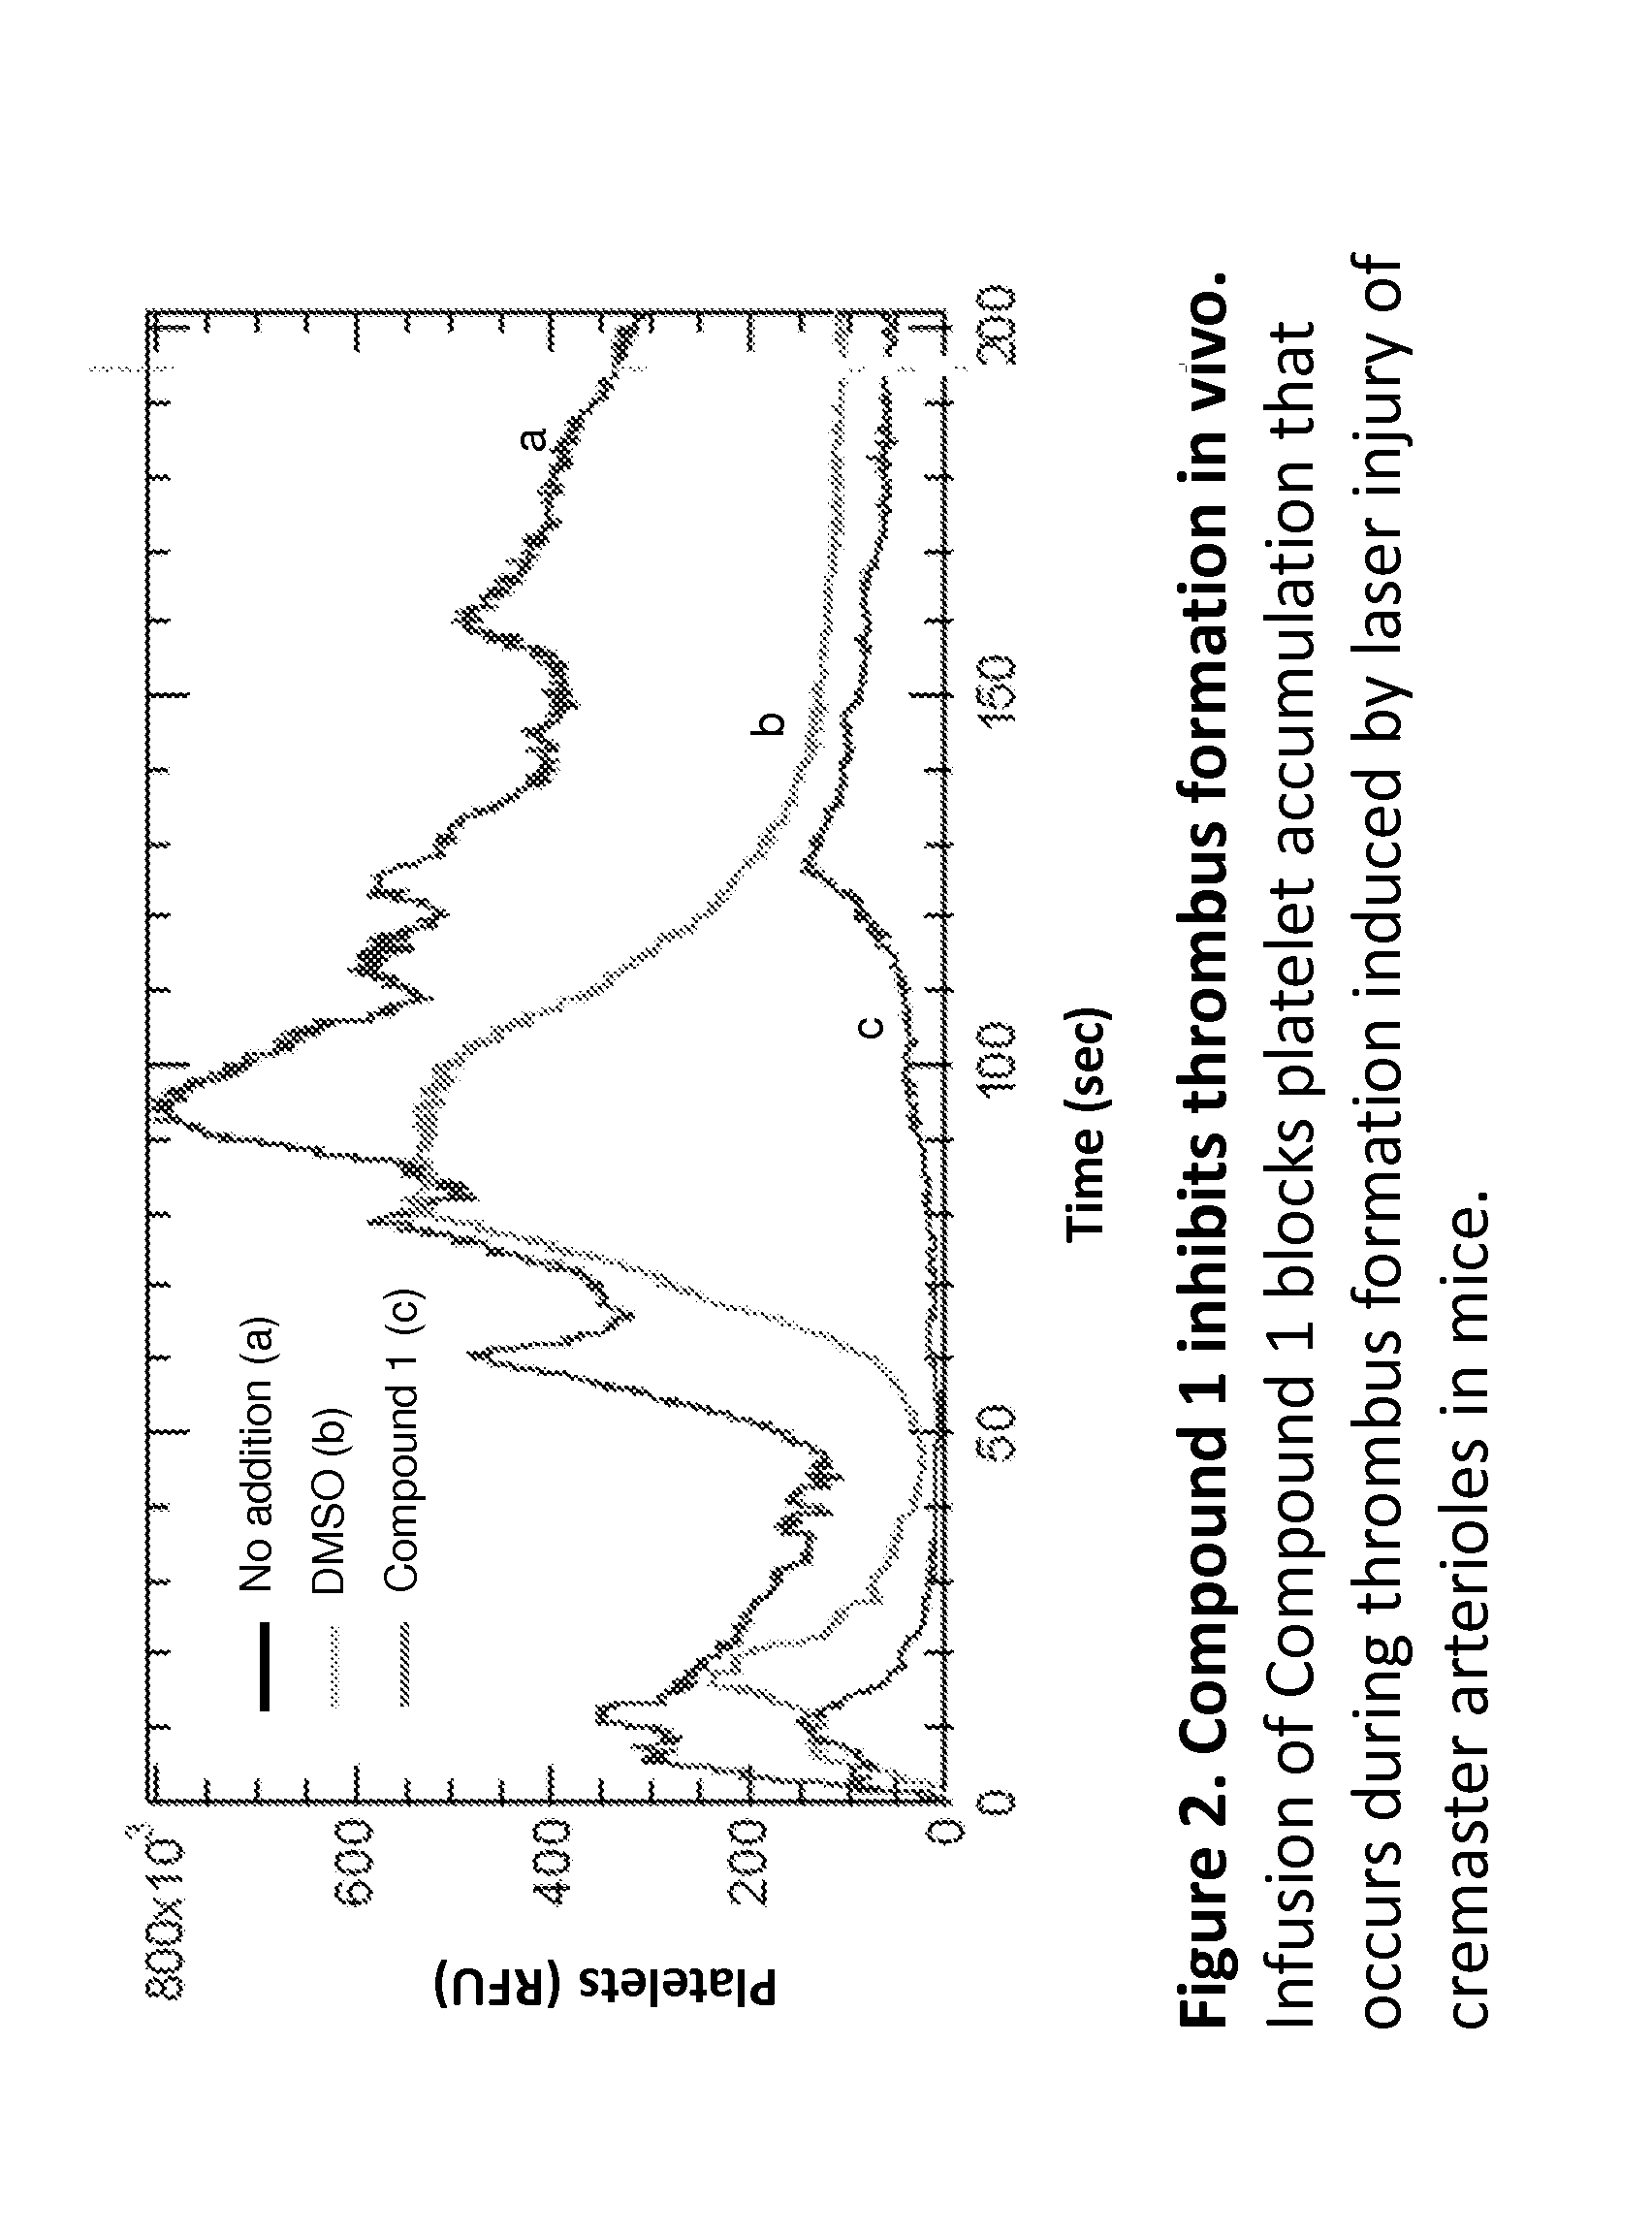 Compounds and compounds for use in methods for treating diseases or conditions mediated by protein disulfide isomerase